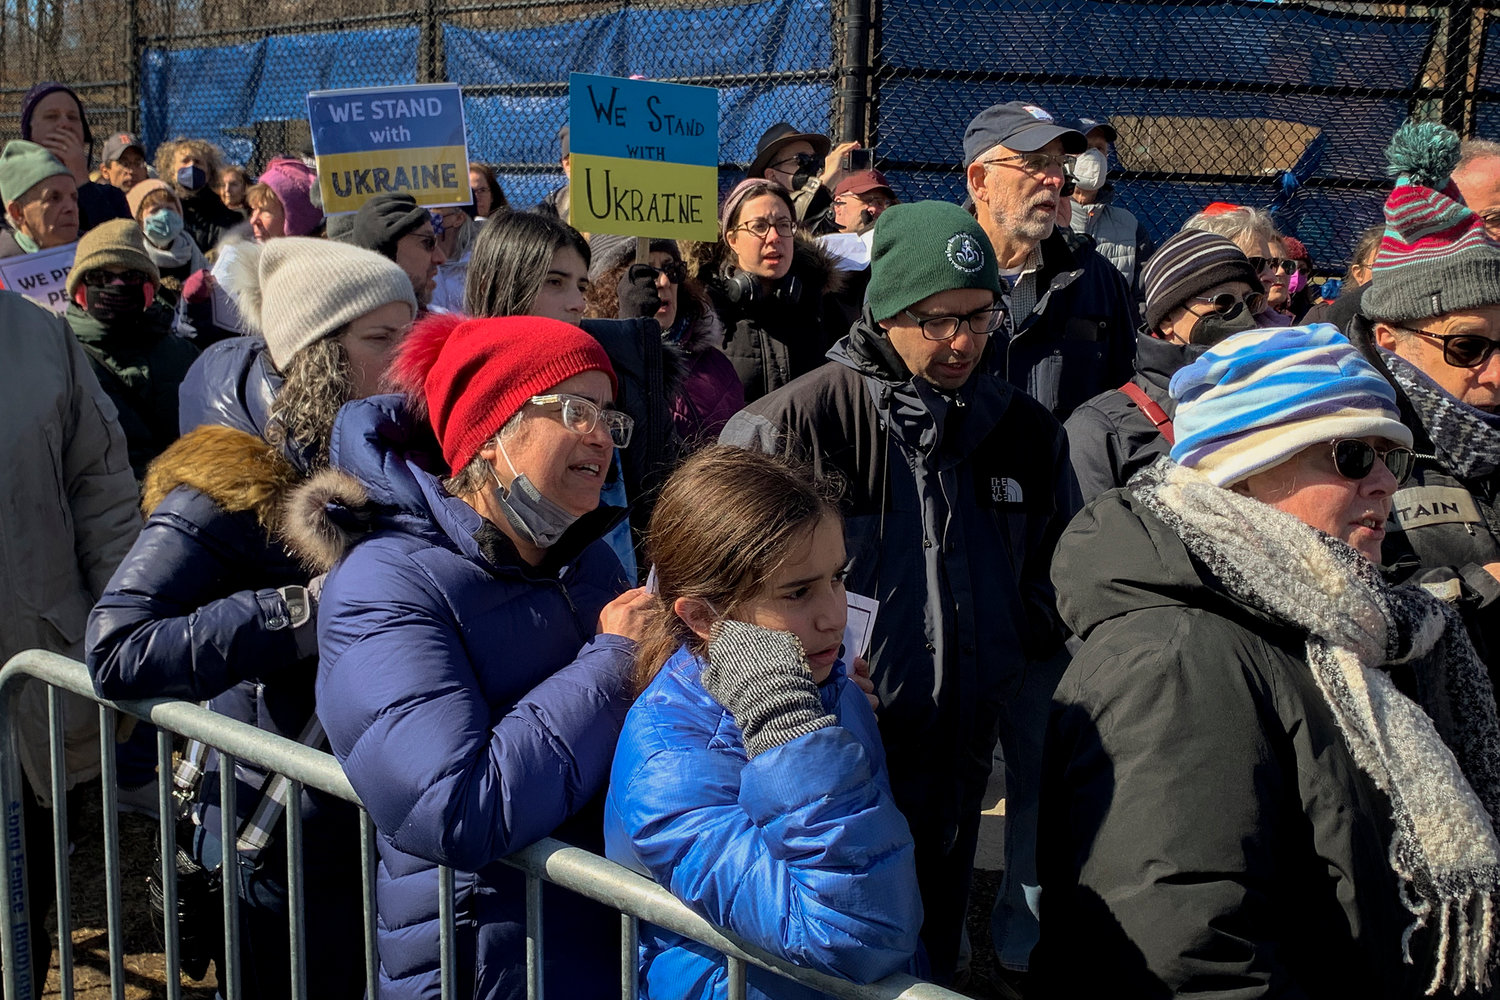 Crowds of Ukrainian nationals and supporters rallied in front of the Russian Mission compound in North Riverdale on Sunday, blowing car horns, singing patriotic songs, and even emptying bottles of Russian vodka onto the ground. The demonstrations have ramped up in recent days after Russia began the invasion of its Eastern European neighbor.